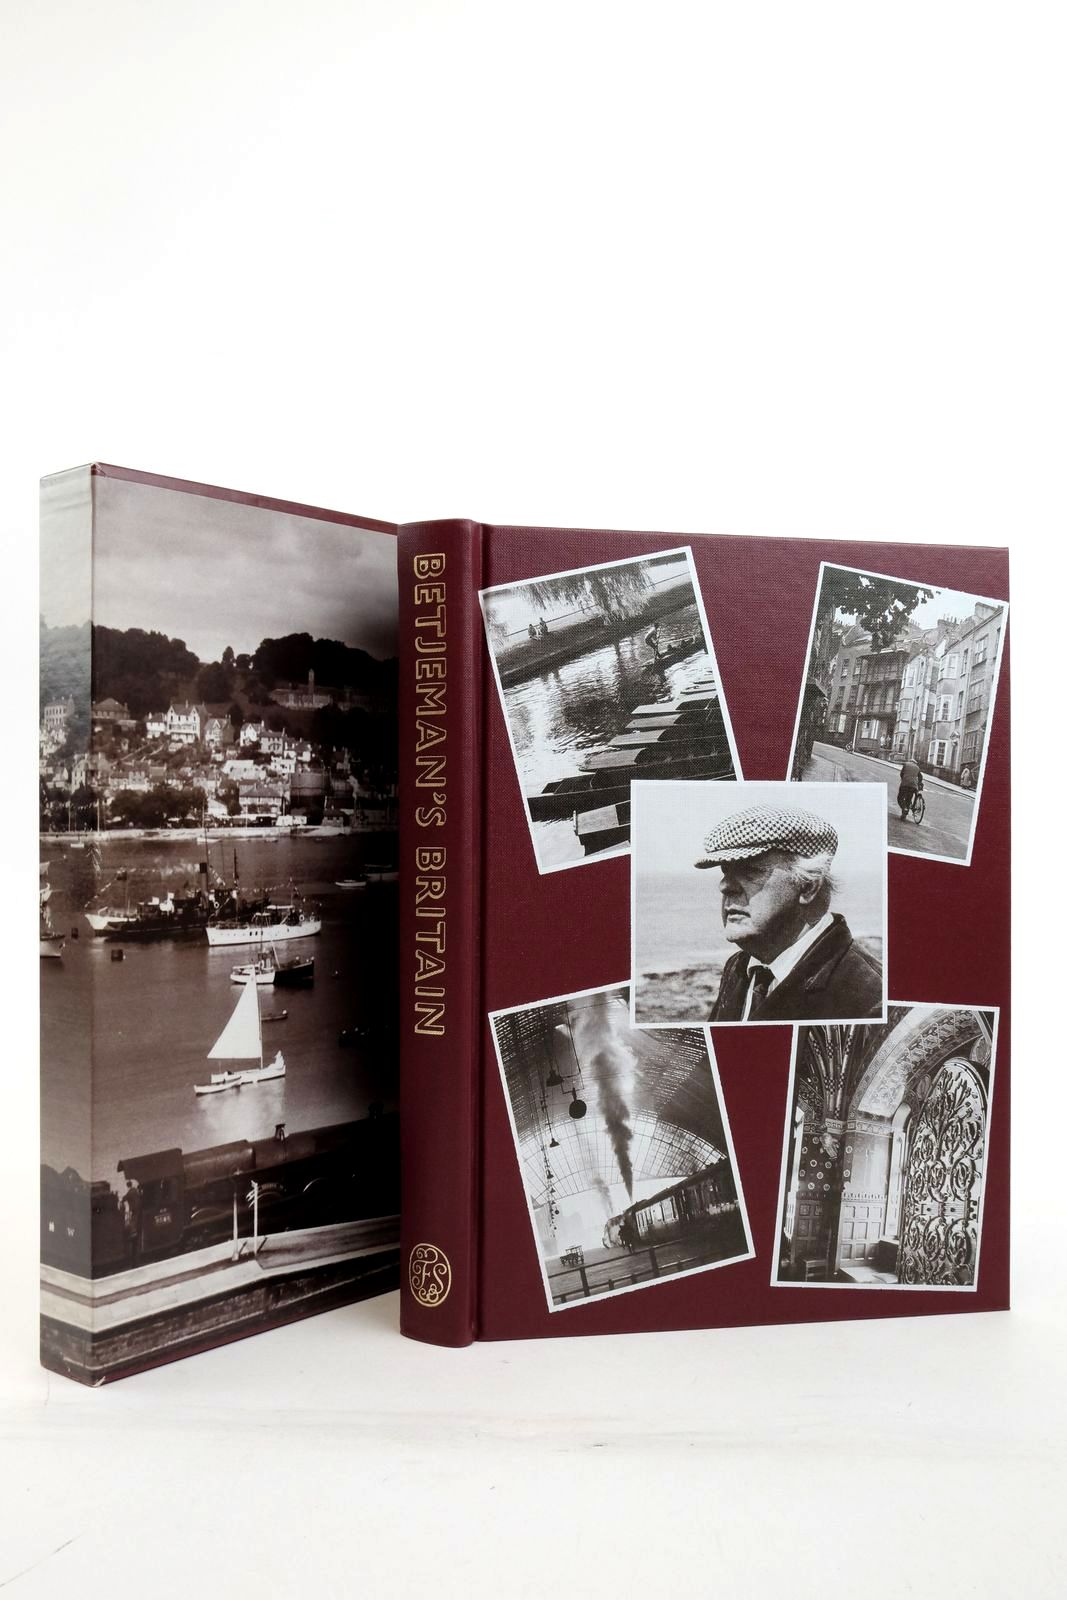 Photo of BETJEMAN'S BRITAIN written by Betjeman, John Green, Candida Lycett published by Folio Society (STOCK CODE: 2138245)  for sale by Stella & Rose's Books